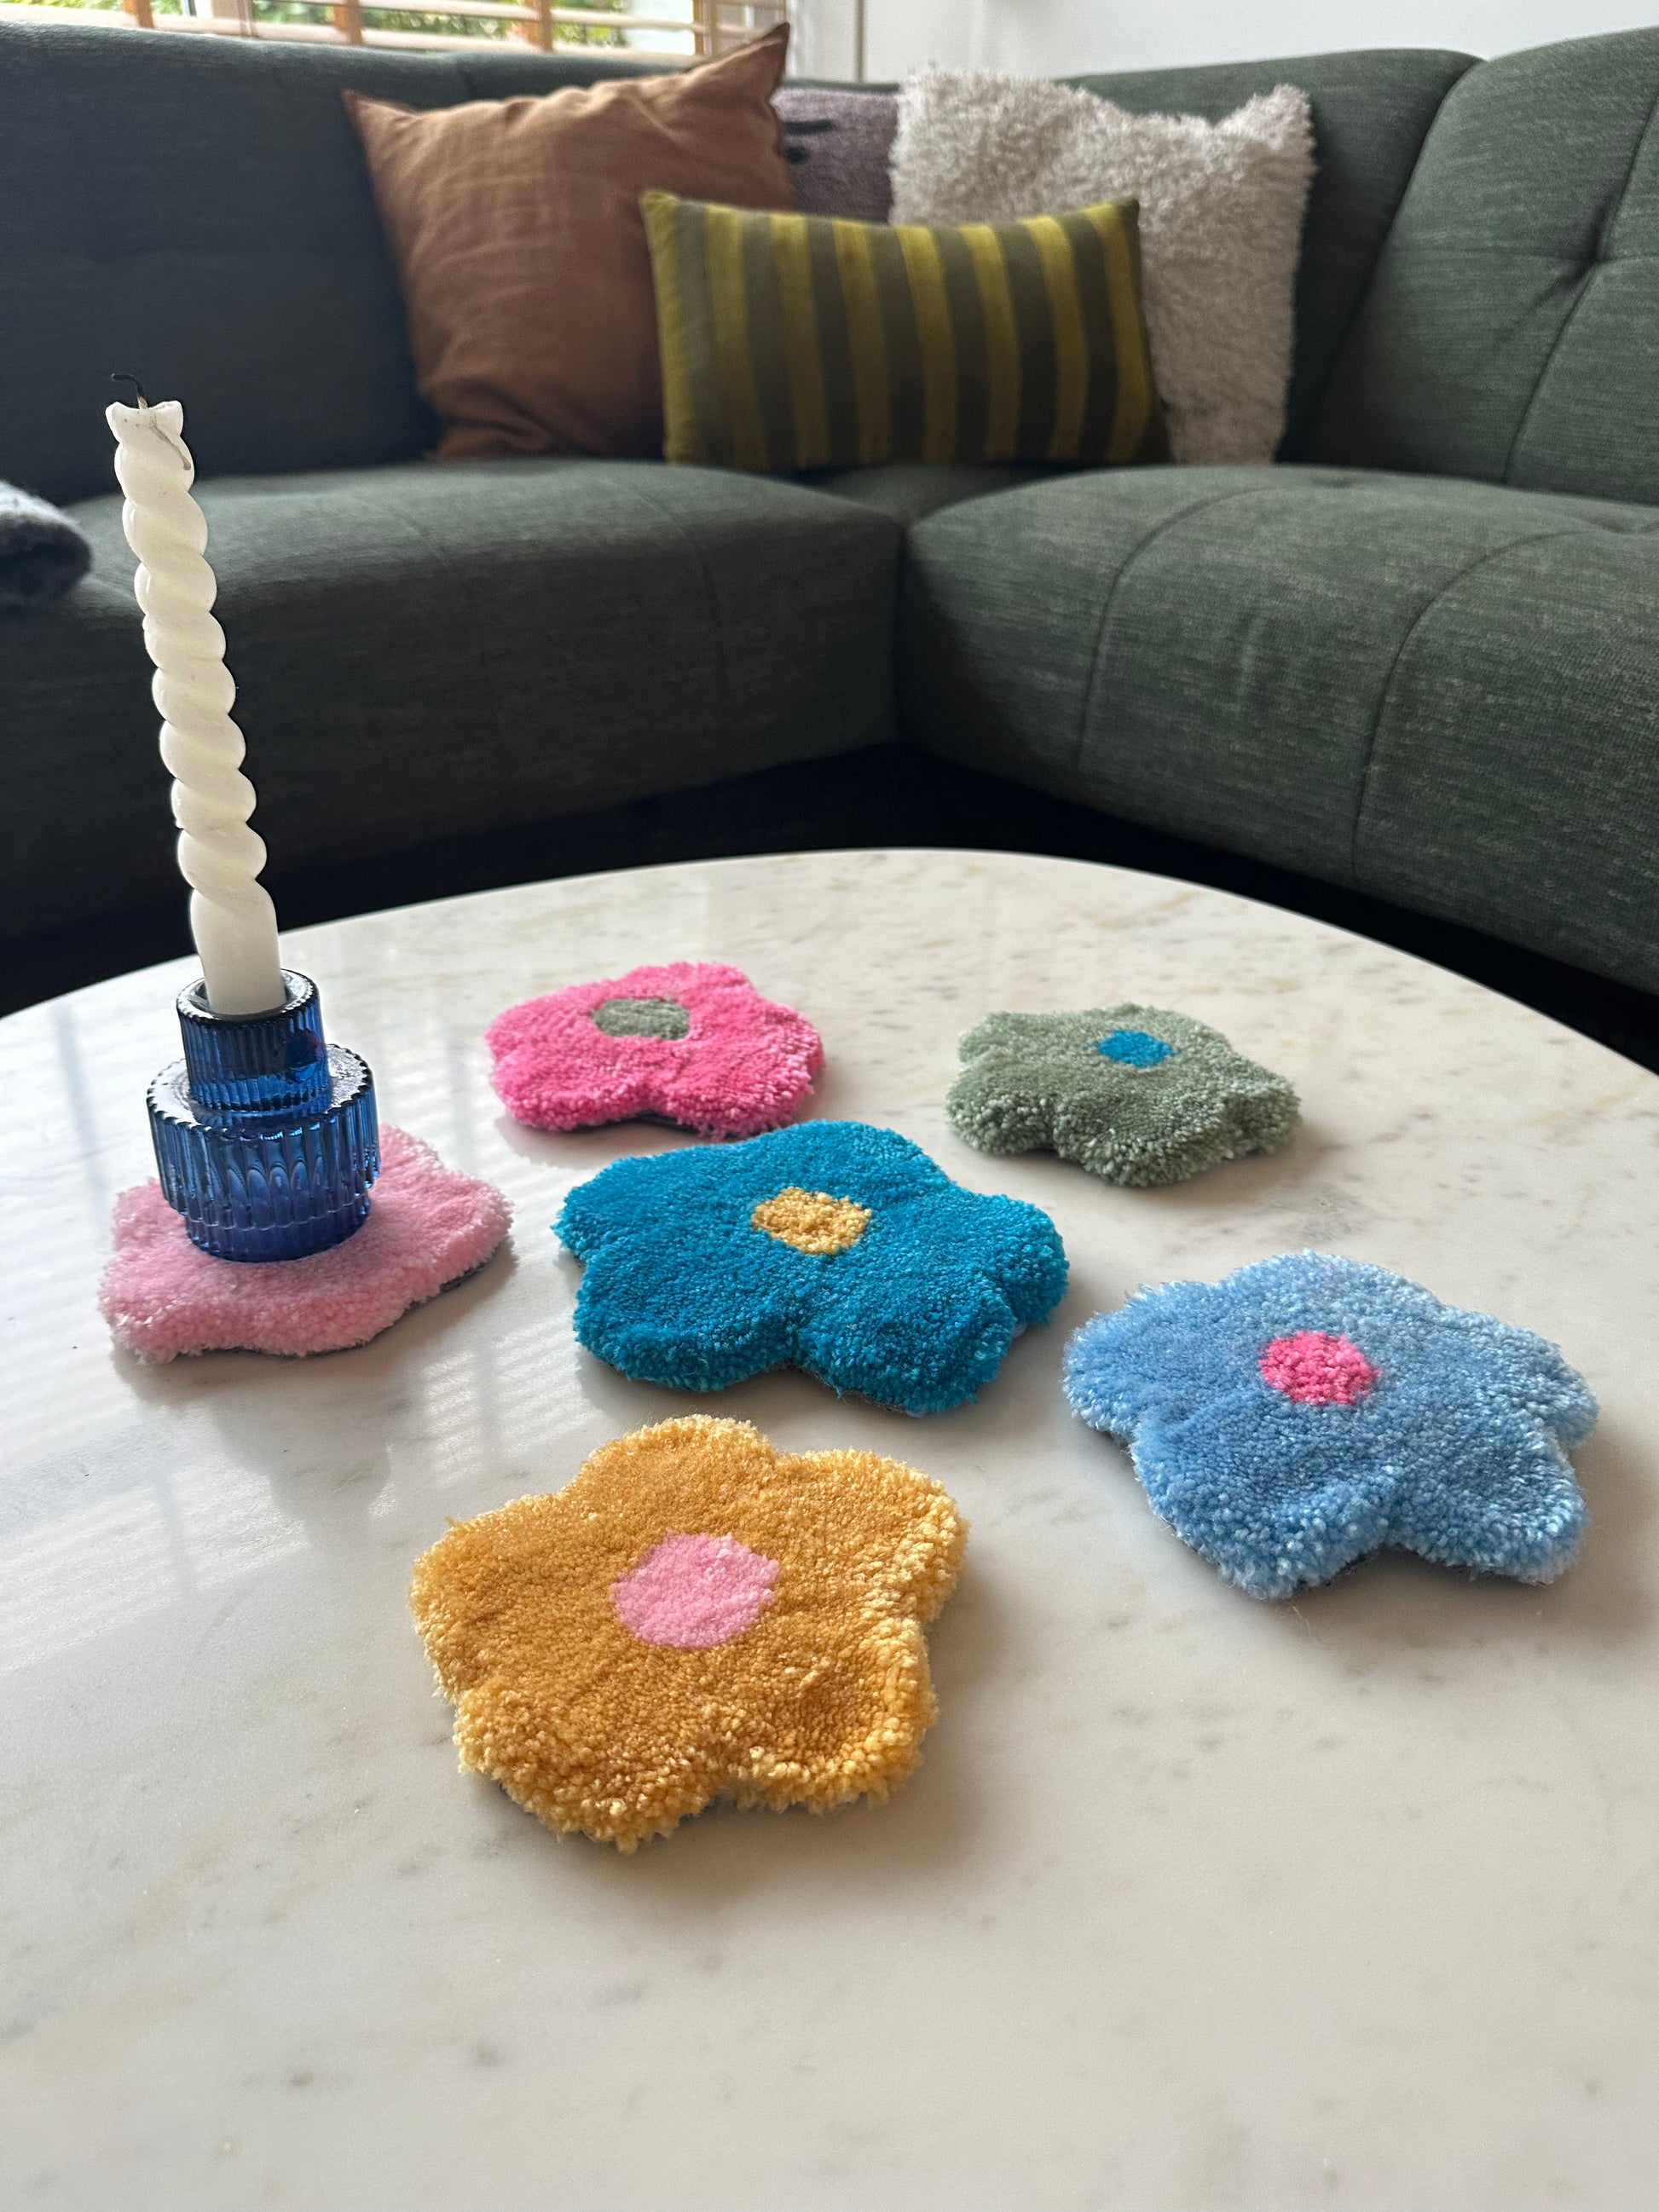 Our tufted flower shaped coasters placed on a table in various color combinations, such as green and blue, pink and green, yellow and pink, pink and blue, blue and pink. A blue candle holder with white candle is placed on one of the coastersMade by The Woollers